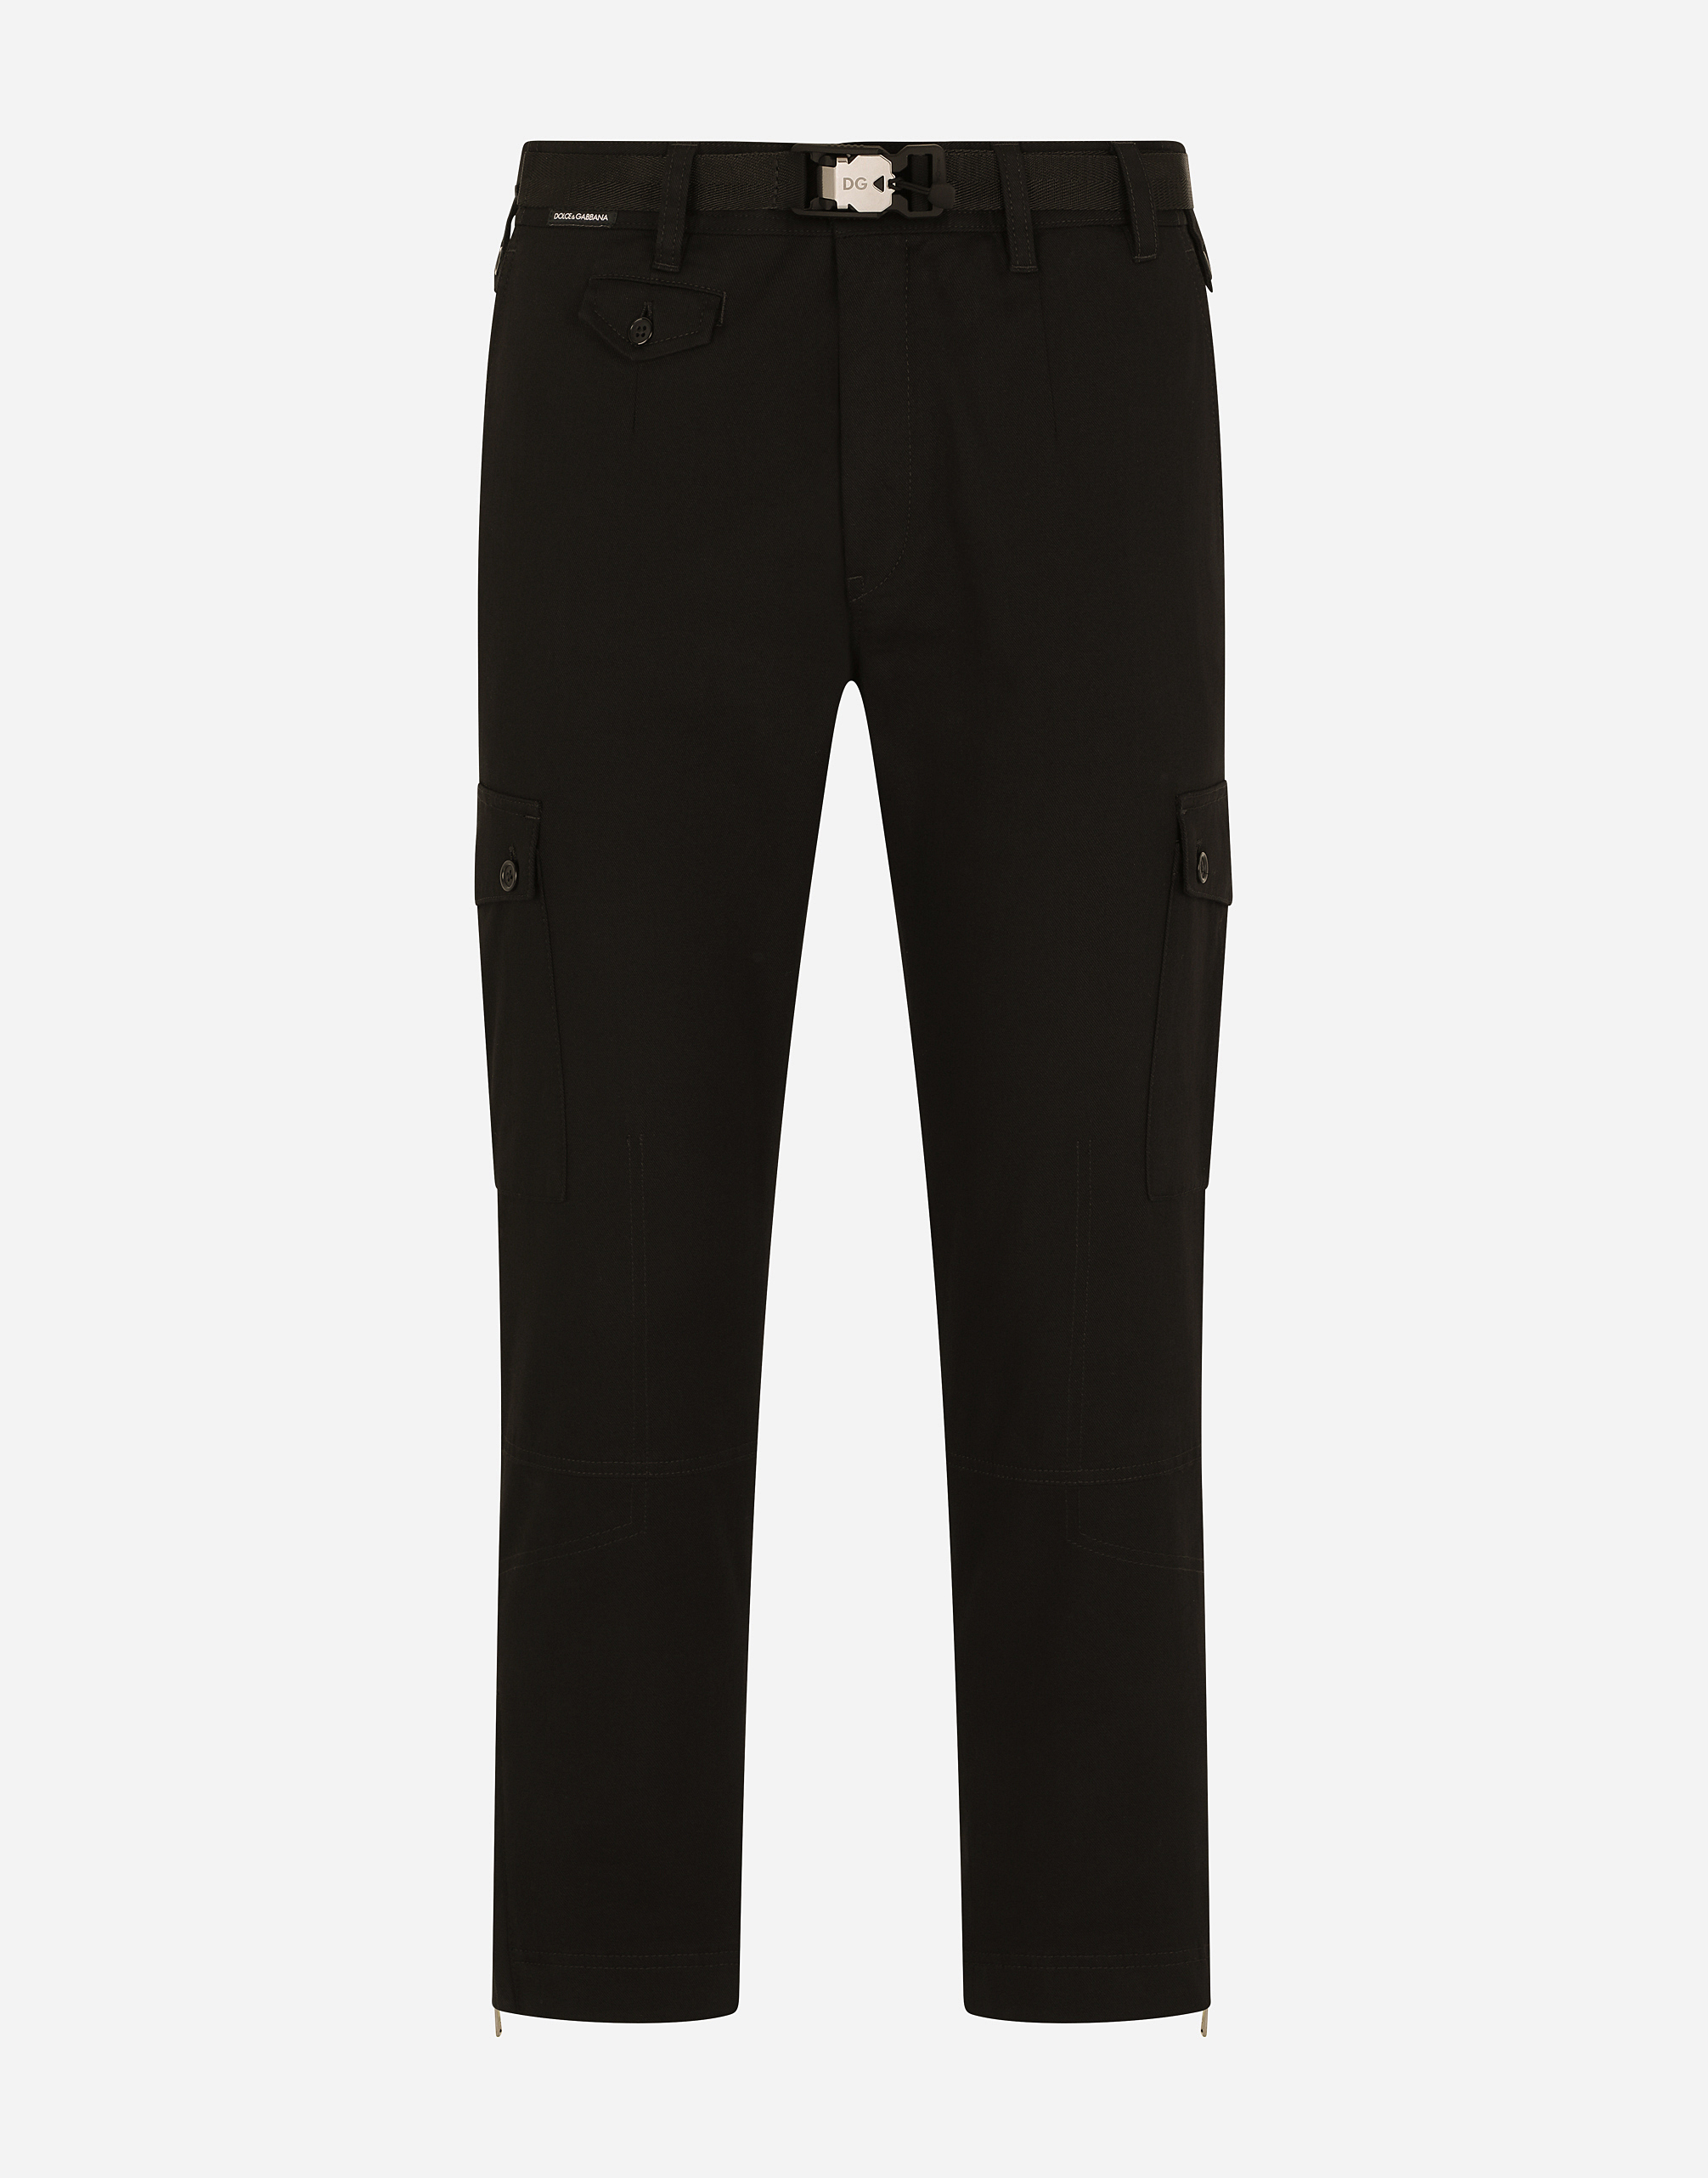 Stretch cotton cargo pants in Black